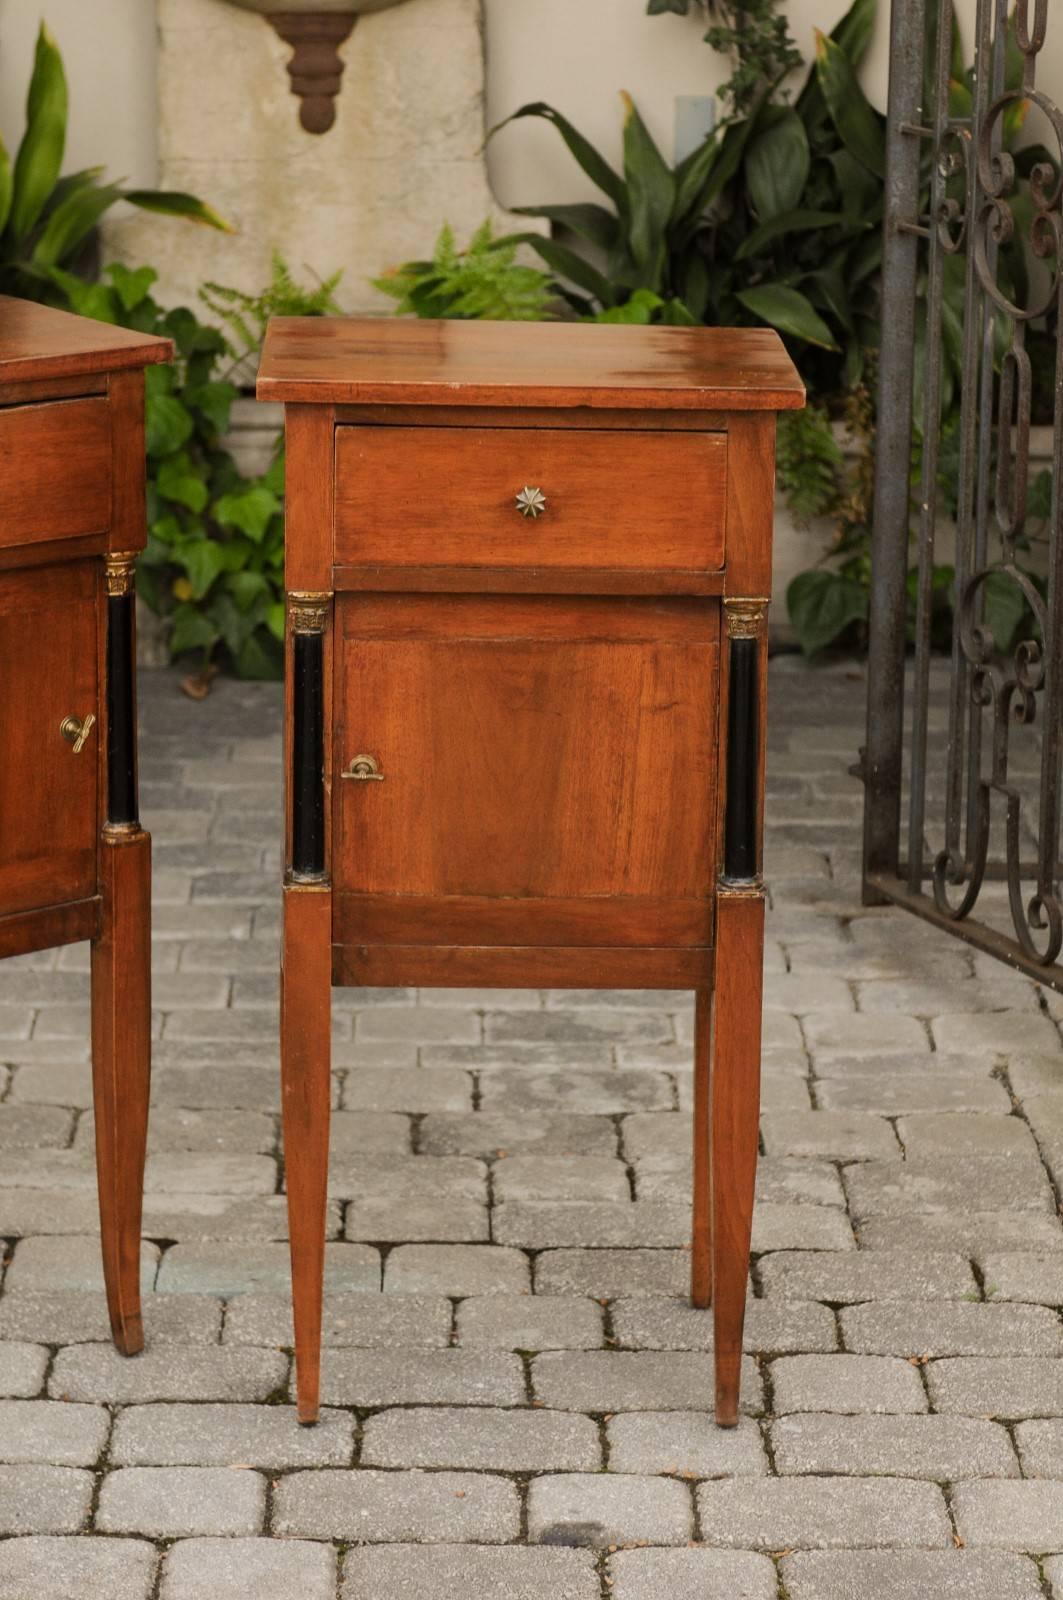 Ebonized Pair of 1840s Biedermeier Walnut Stands with Drawer, Door and Semi-Columns For Sale